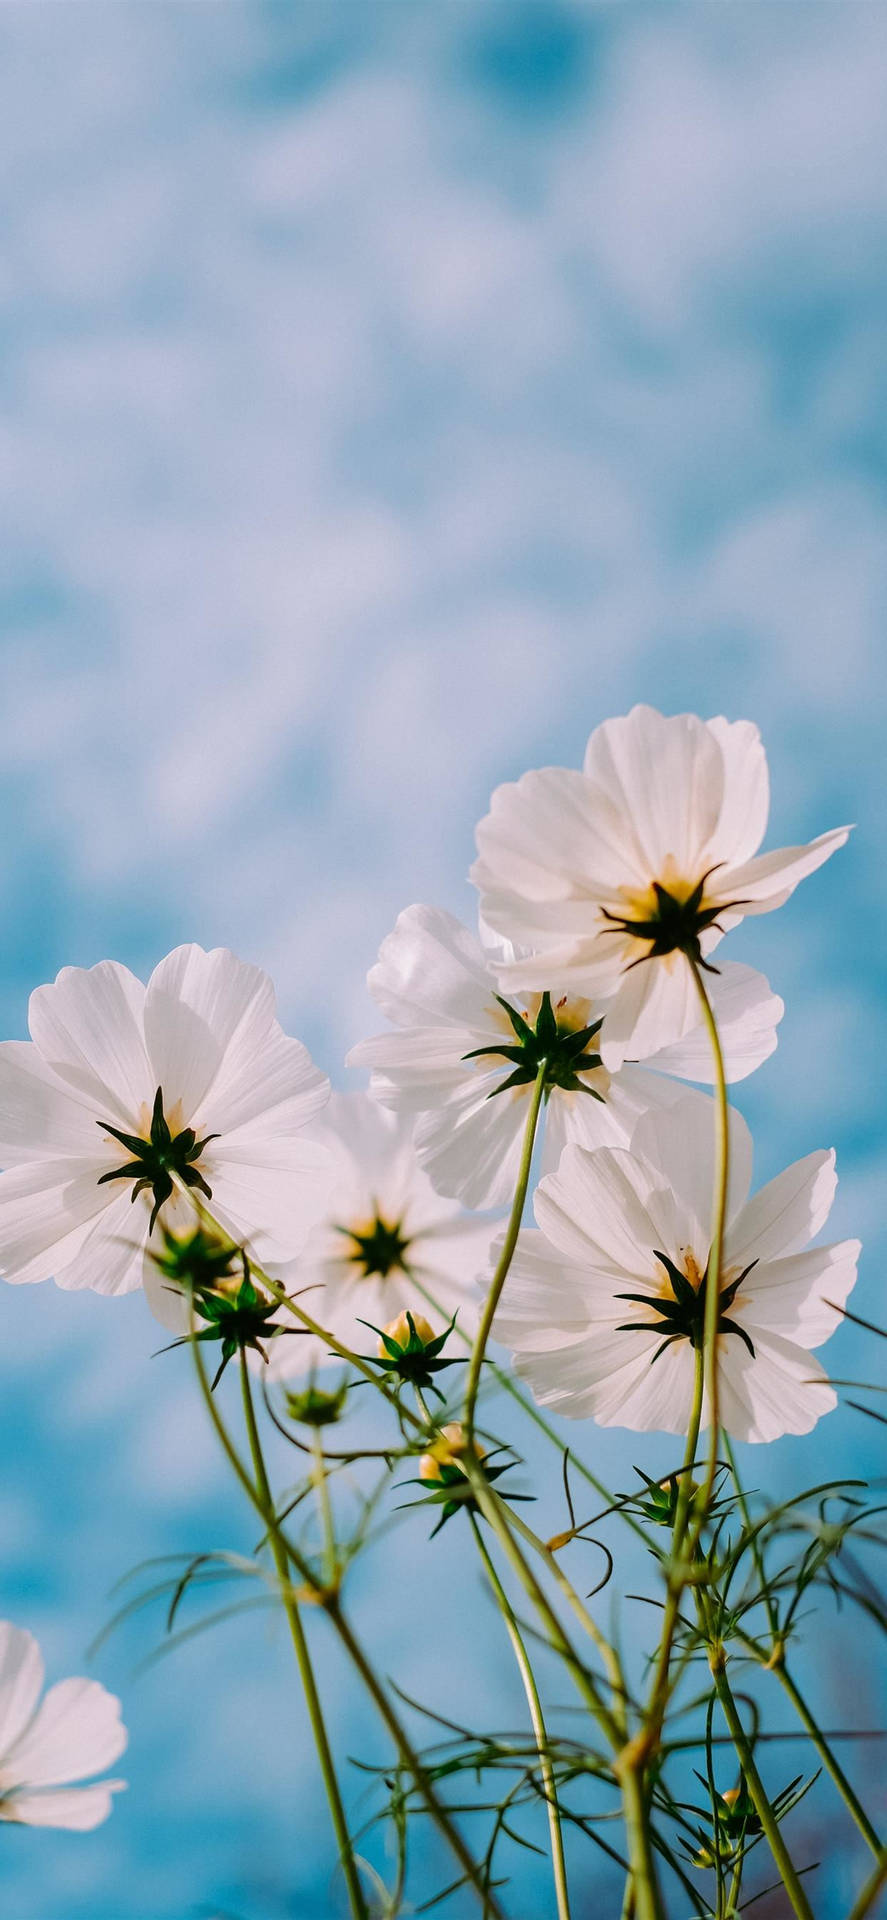 Spring Flowers Iphone 11 Pro Max Background